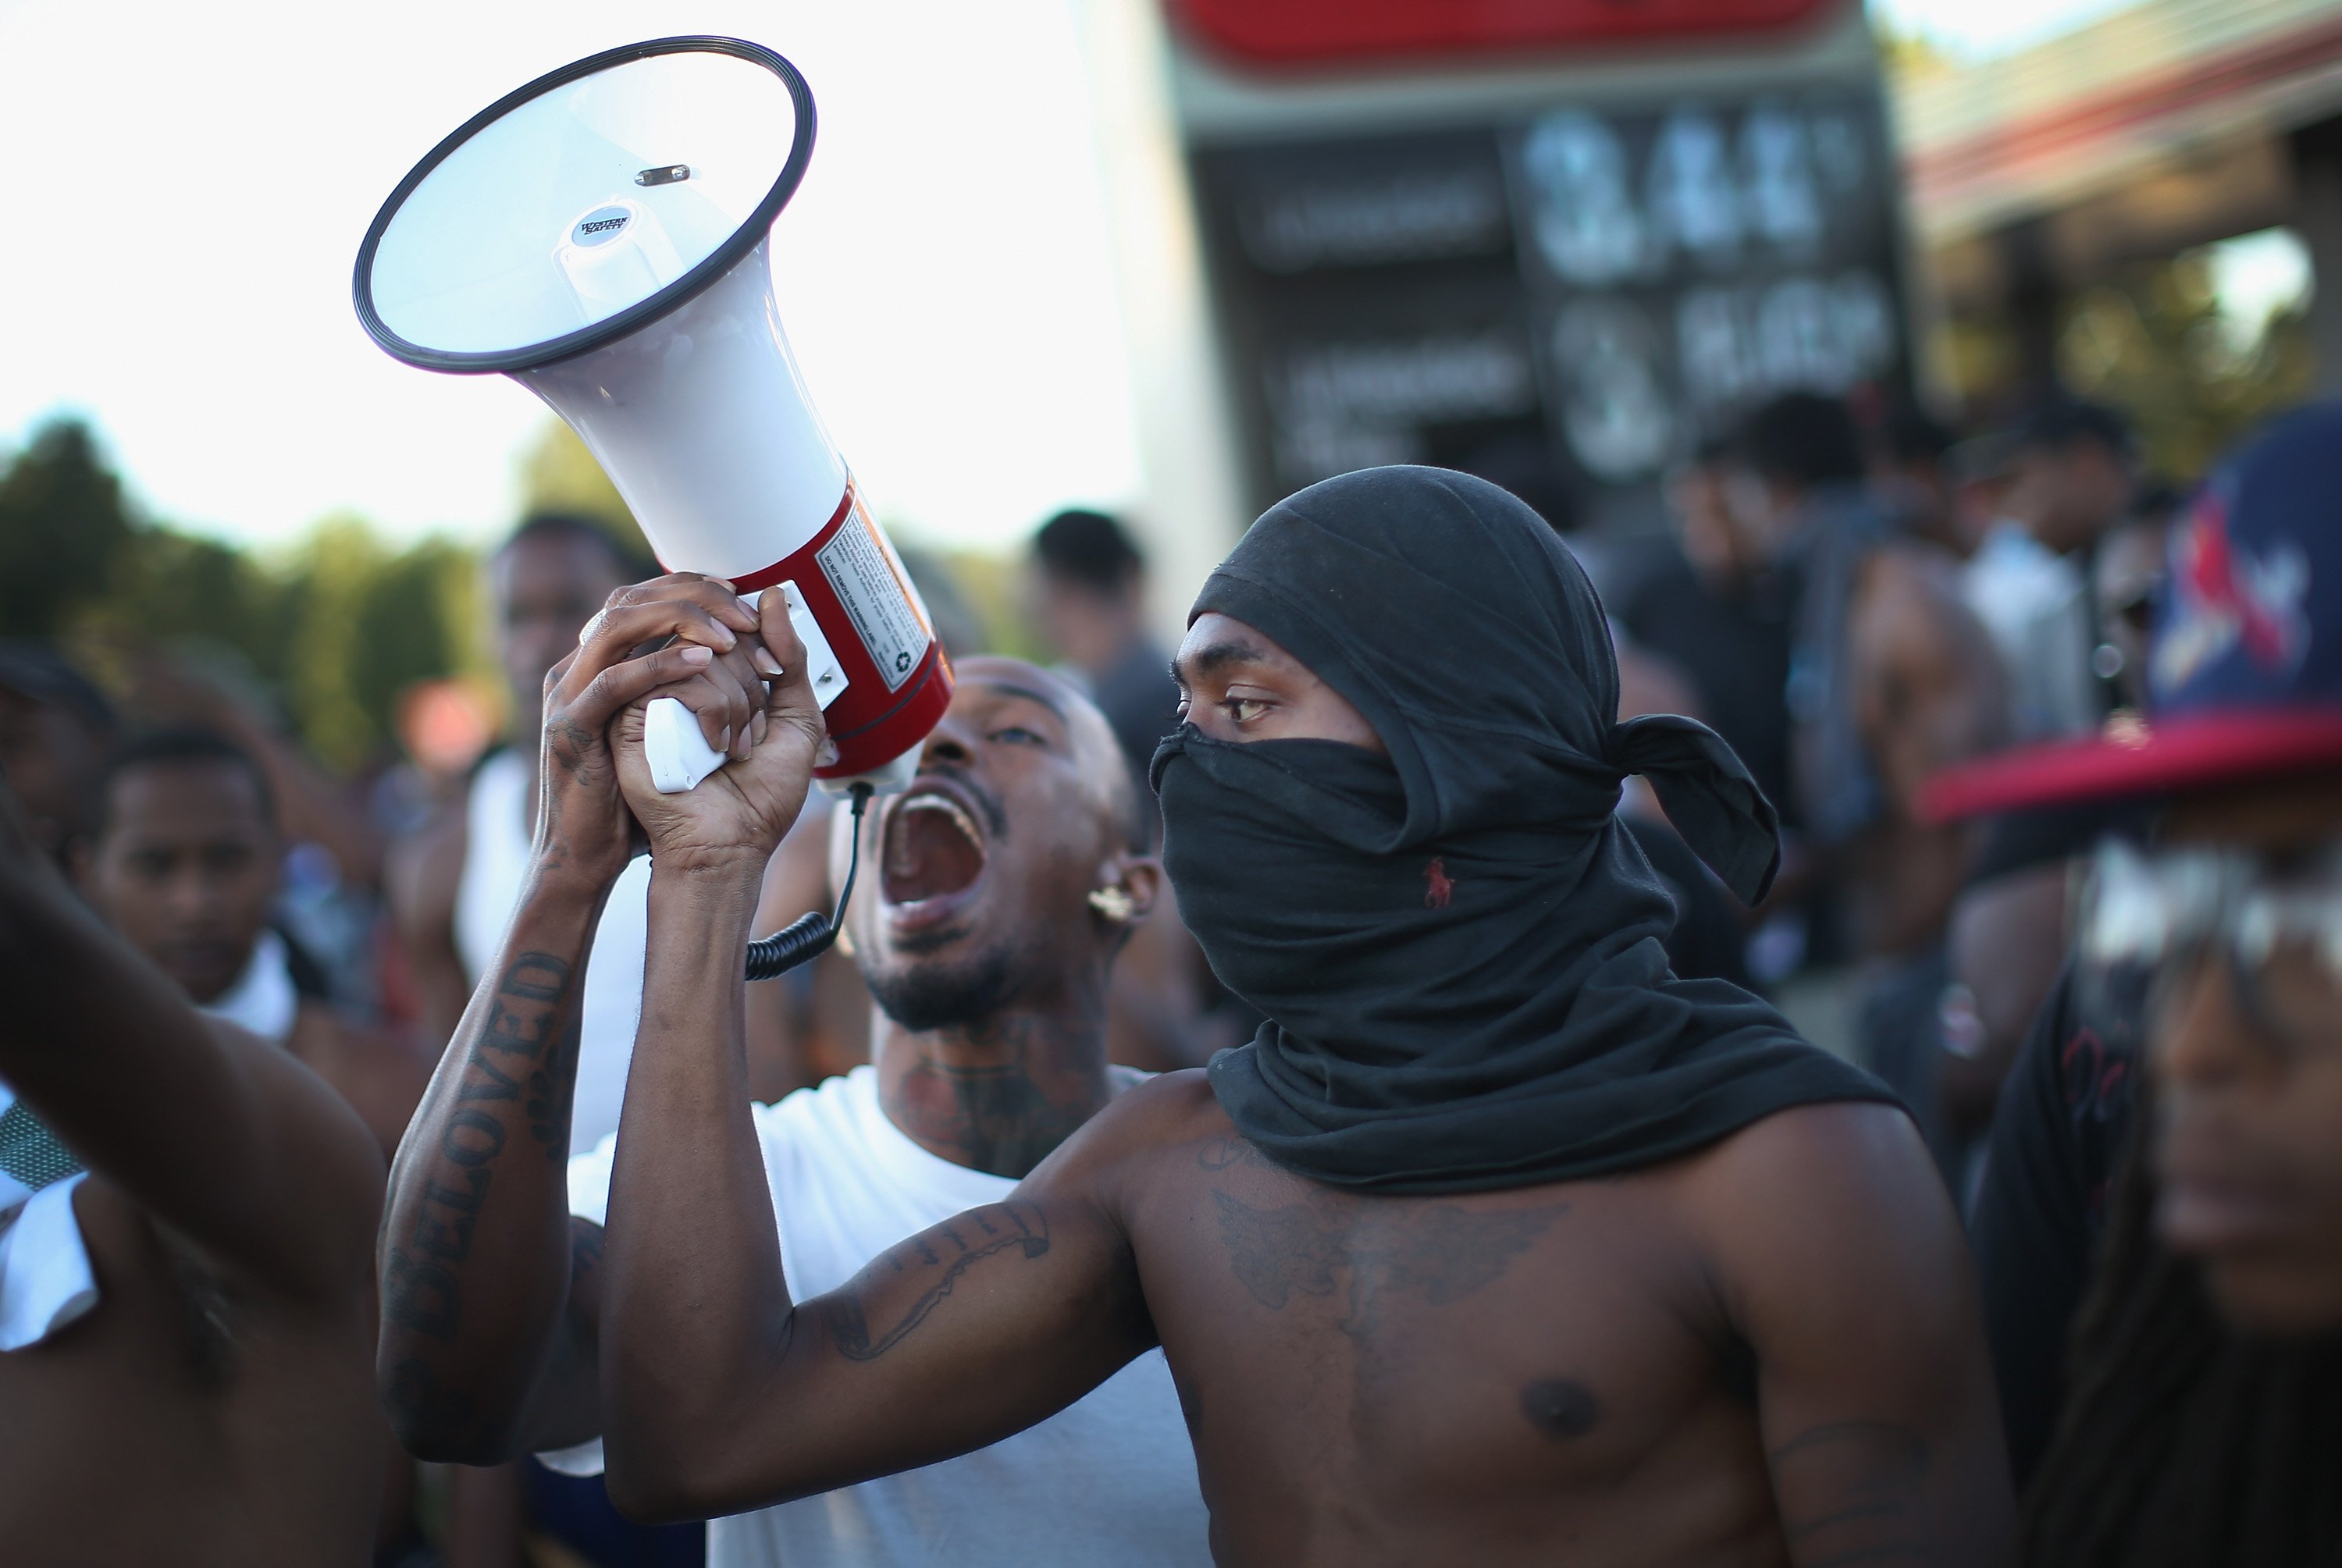 Demonstrators protest the killing of teenager Michael Brown in Ferguson, Mo. on August 12, 2014.